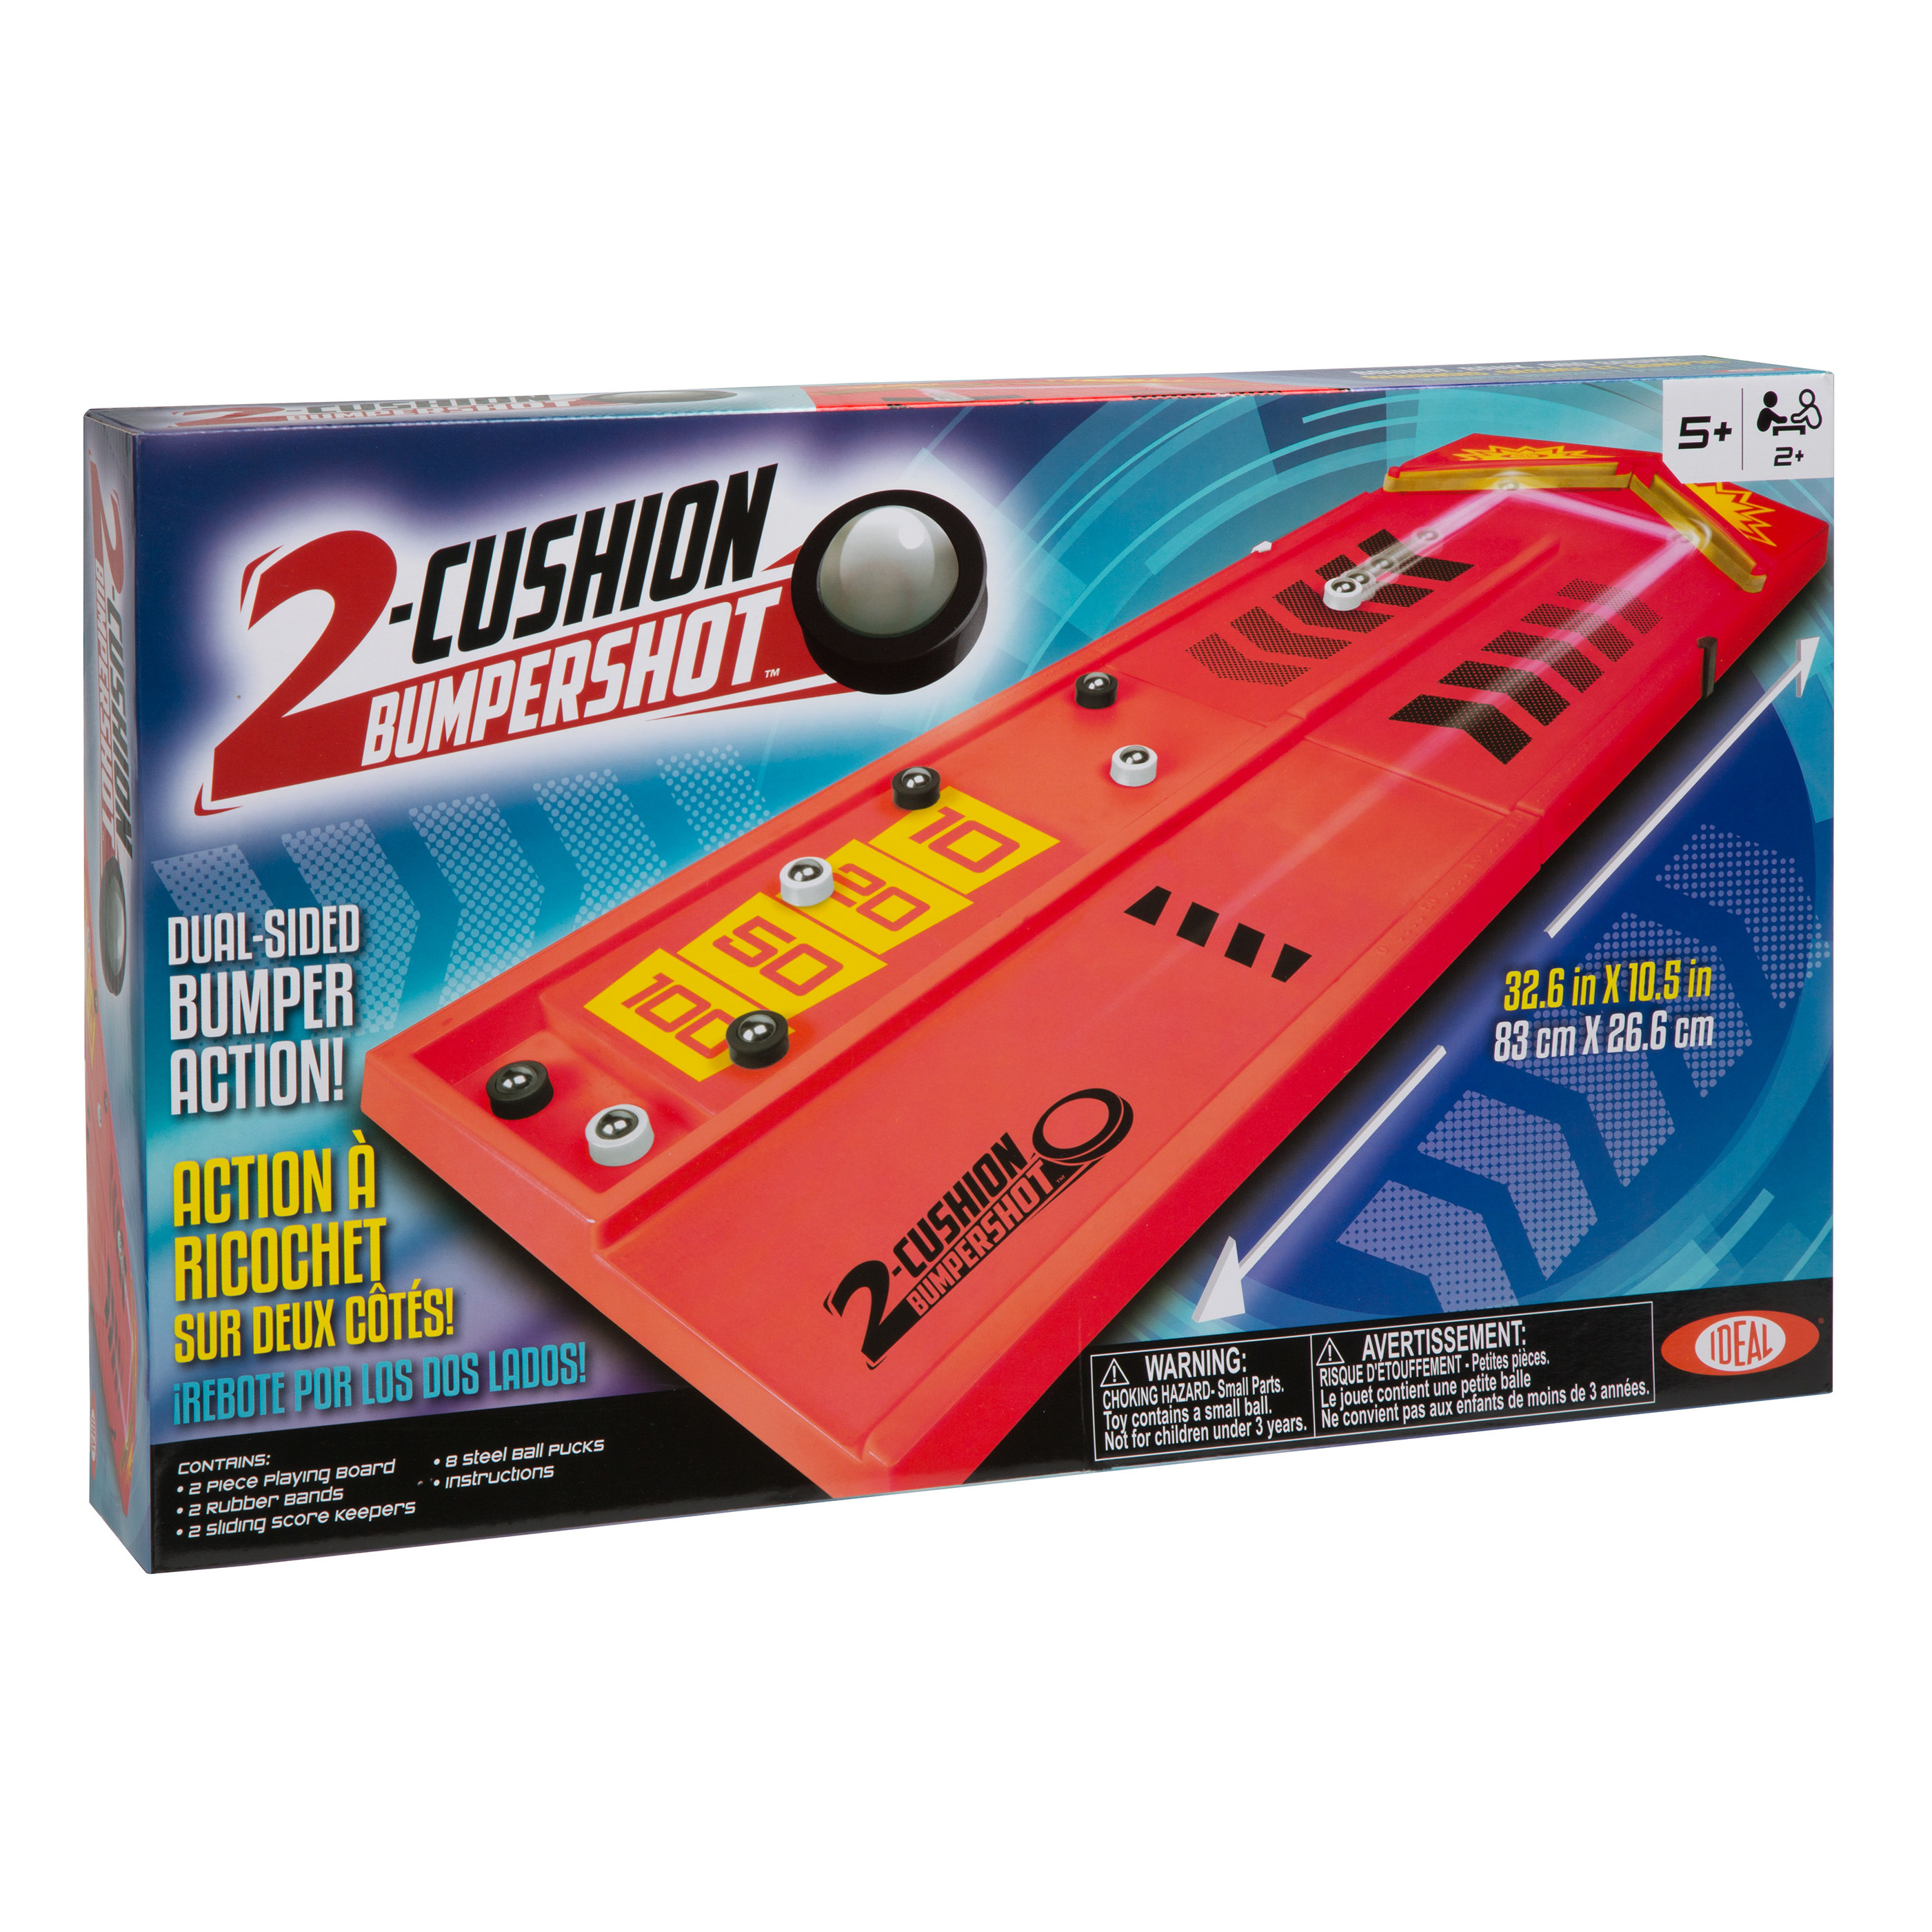 Ideal Two Cushion Bumpershot Tabletop Game - image 1 of 5